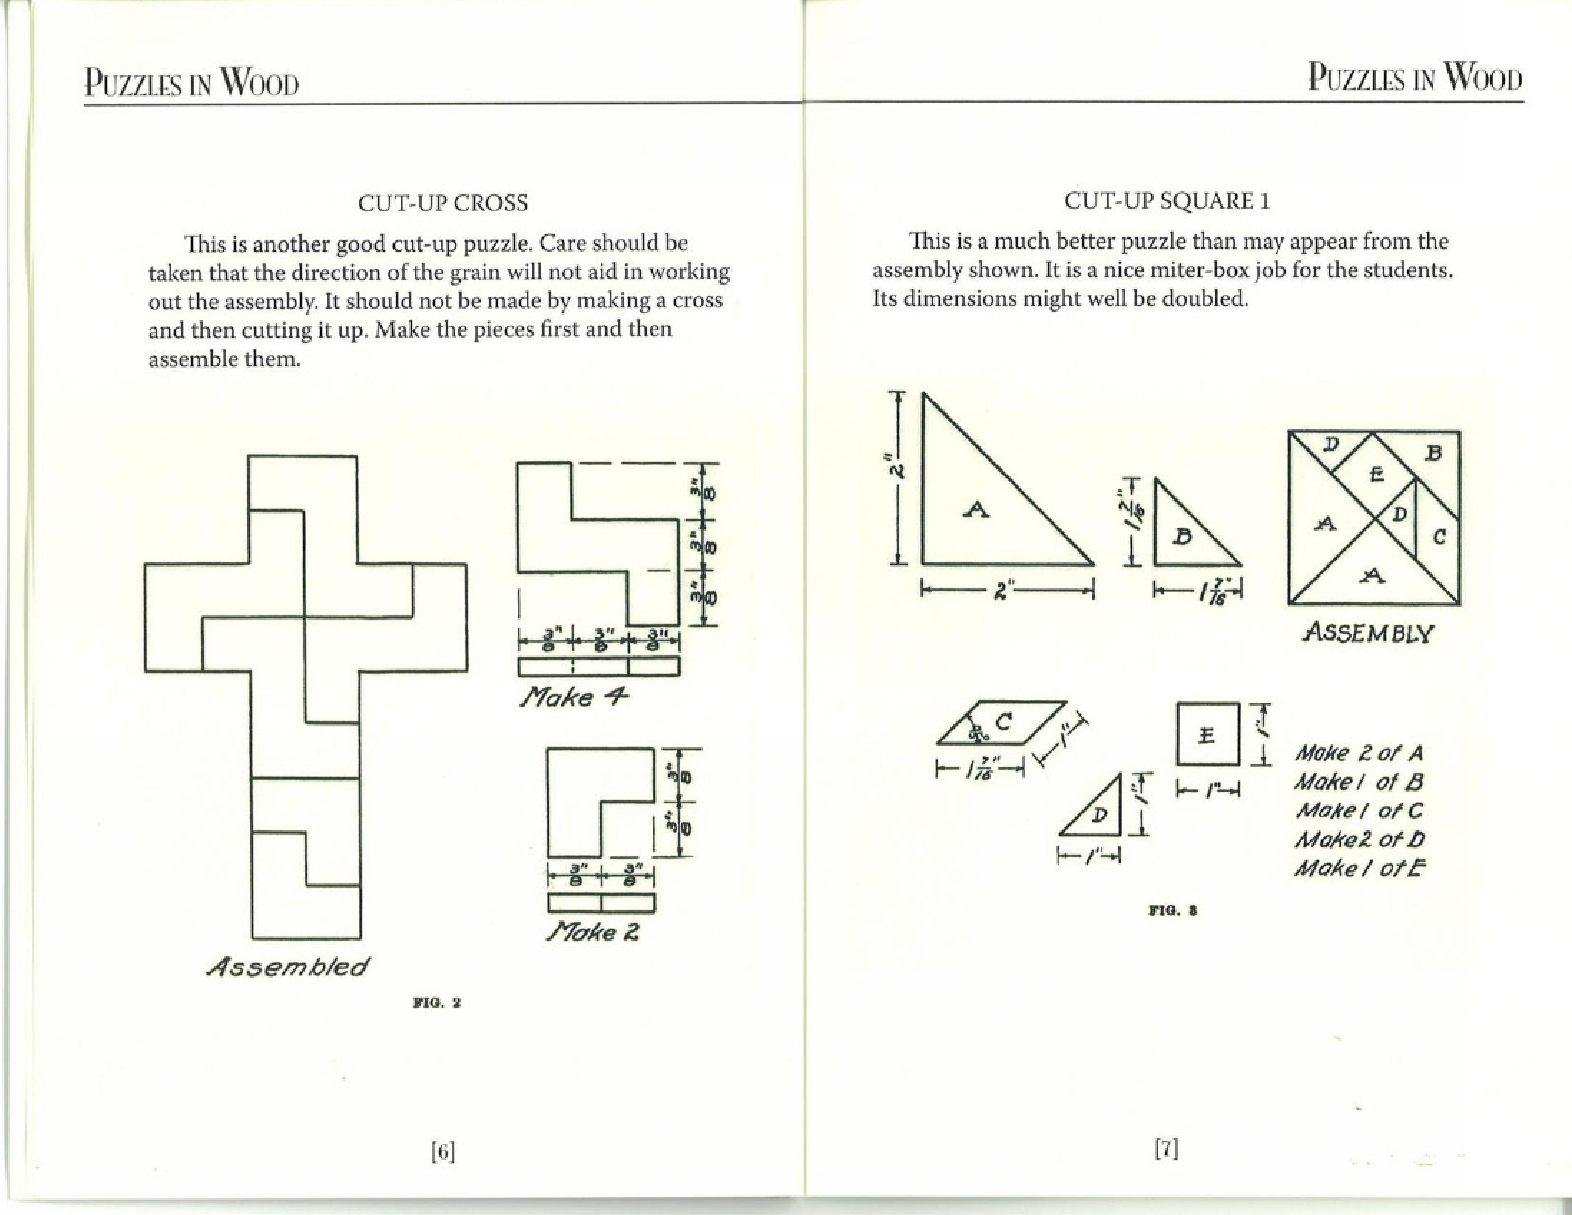 13-5 (10-11) Puzzles in Wood Simple Patterns for Creating 45 Classics _木材-简单的模式，创建45个经典